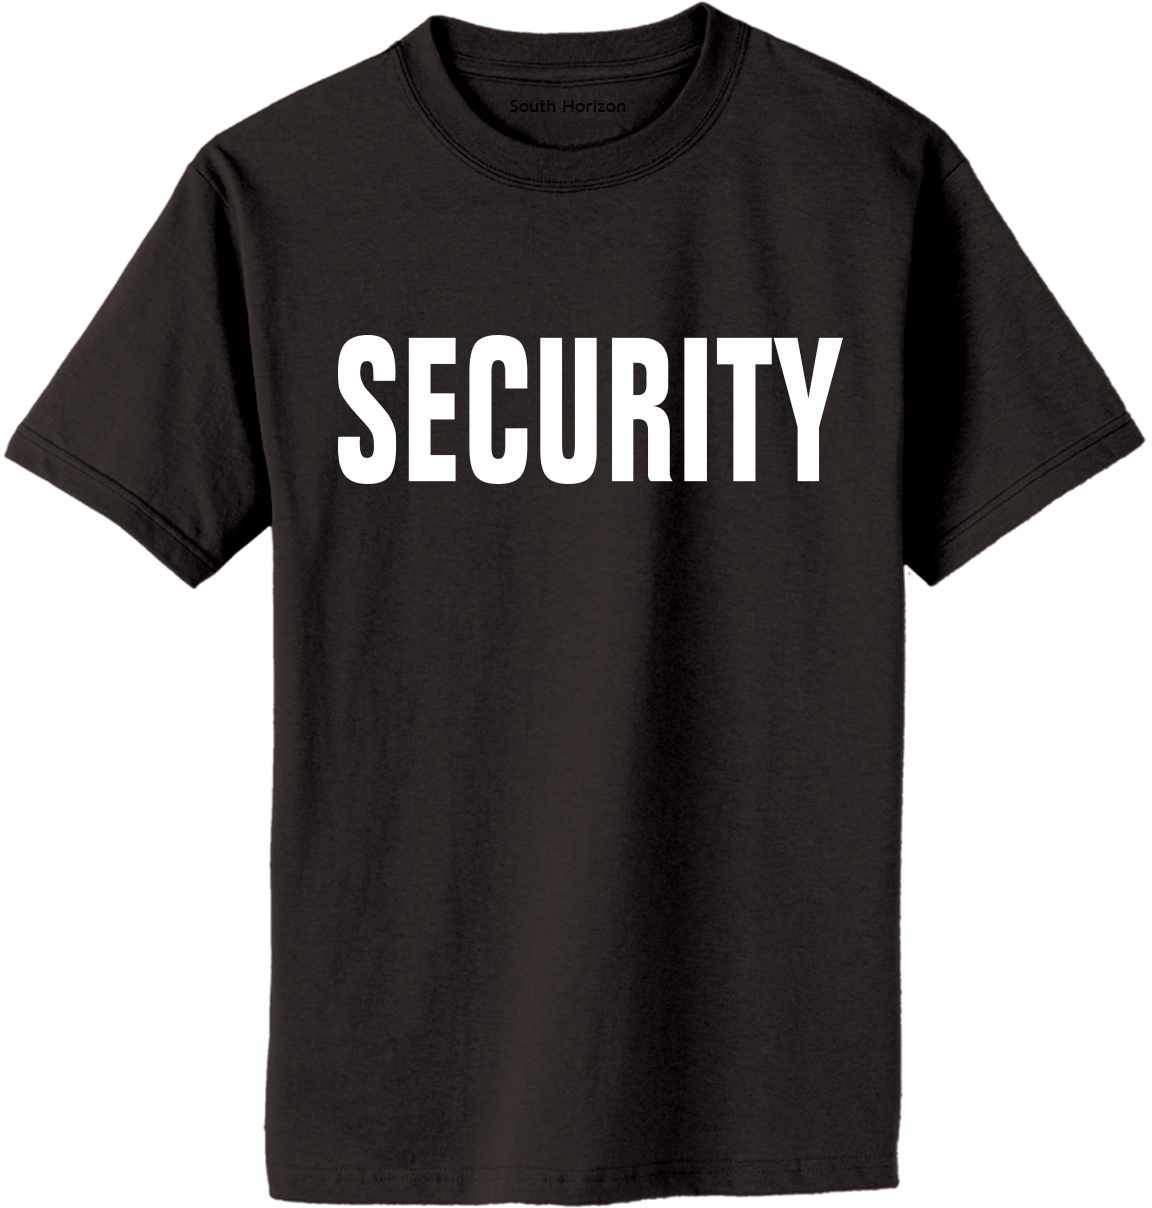 SECURITY (2 sided) Adult T-Shirt